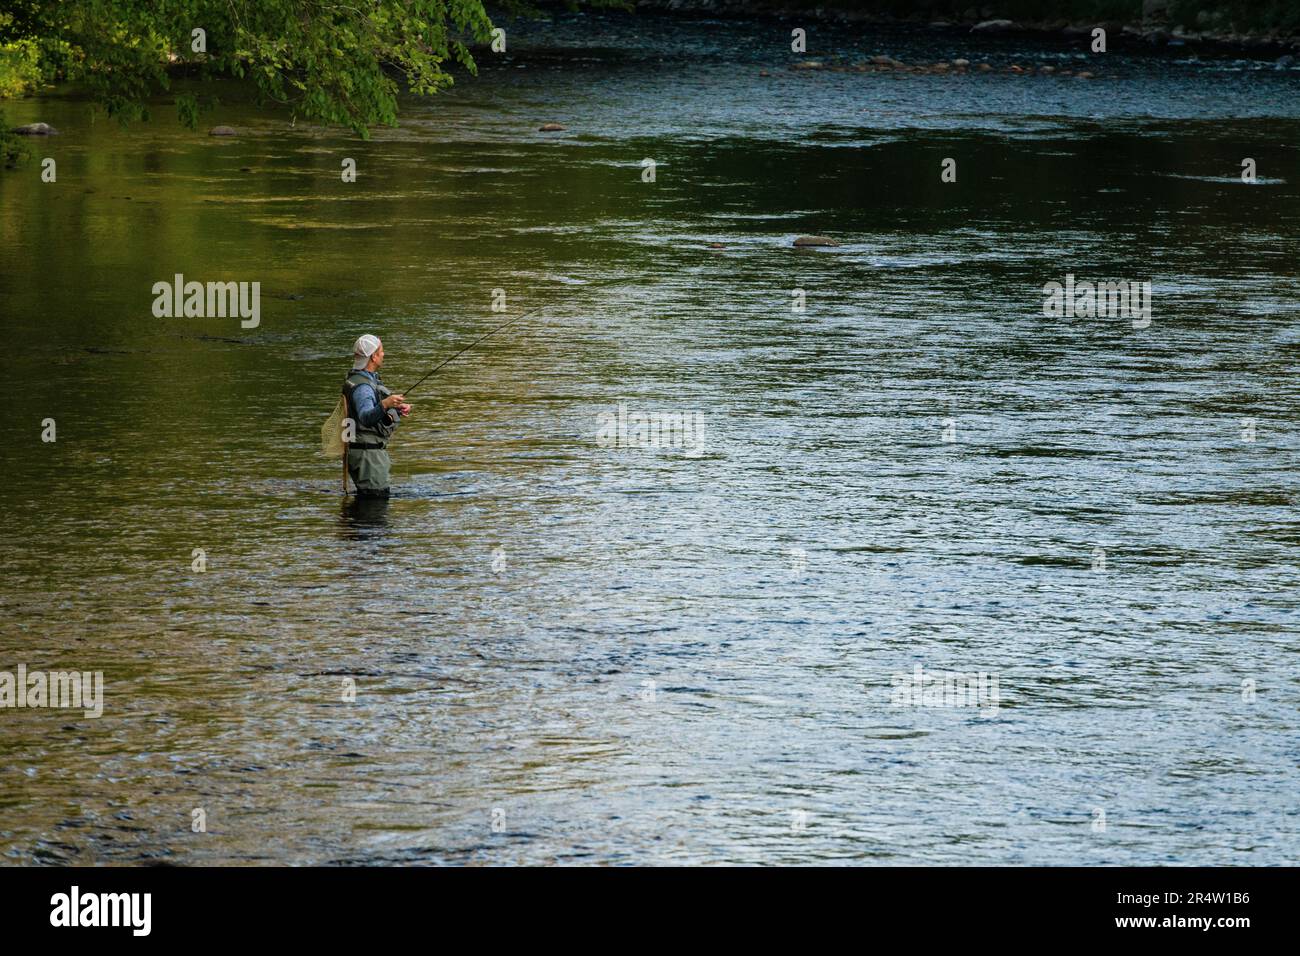 Fly Fisherman on the West Branch of the Farmington River American Legion and Peoples State Forests   Barkhamsted, Connecticut, USA Stock Photo